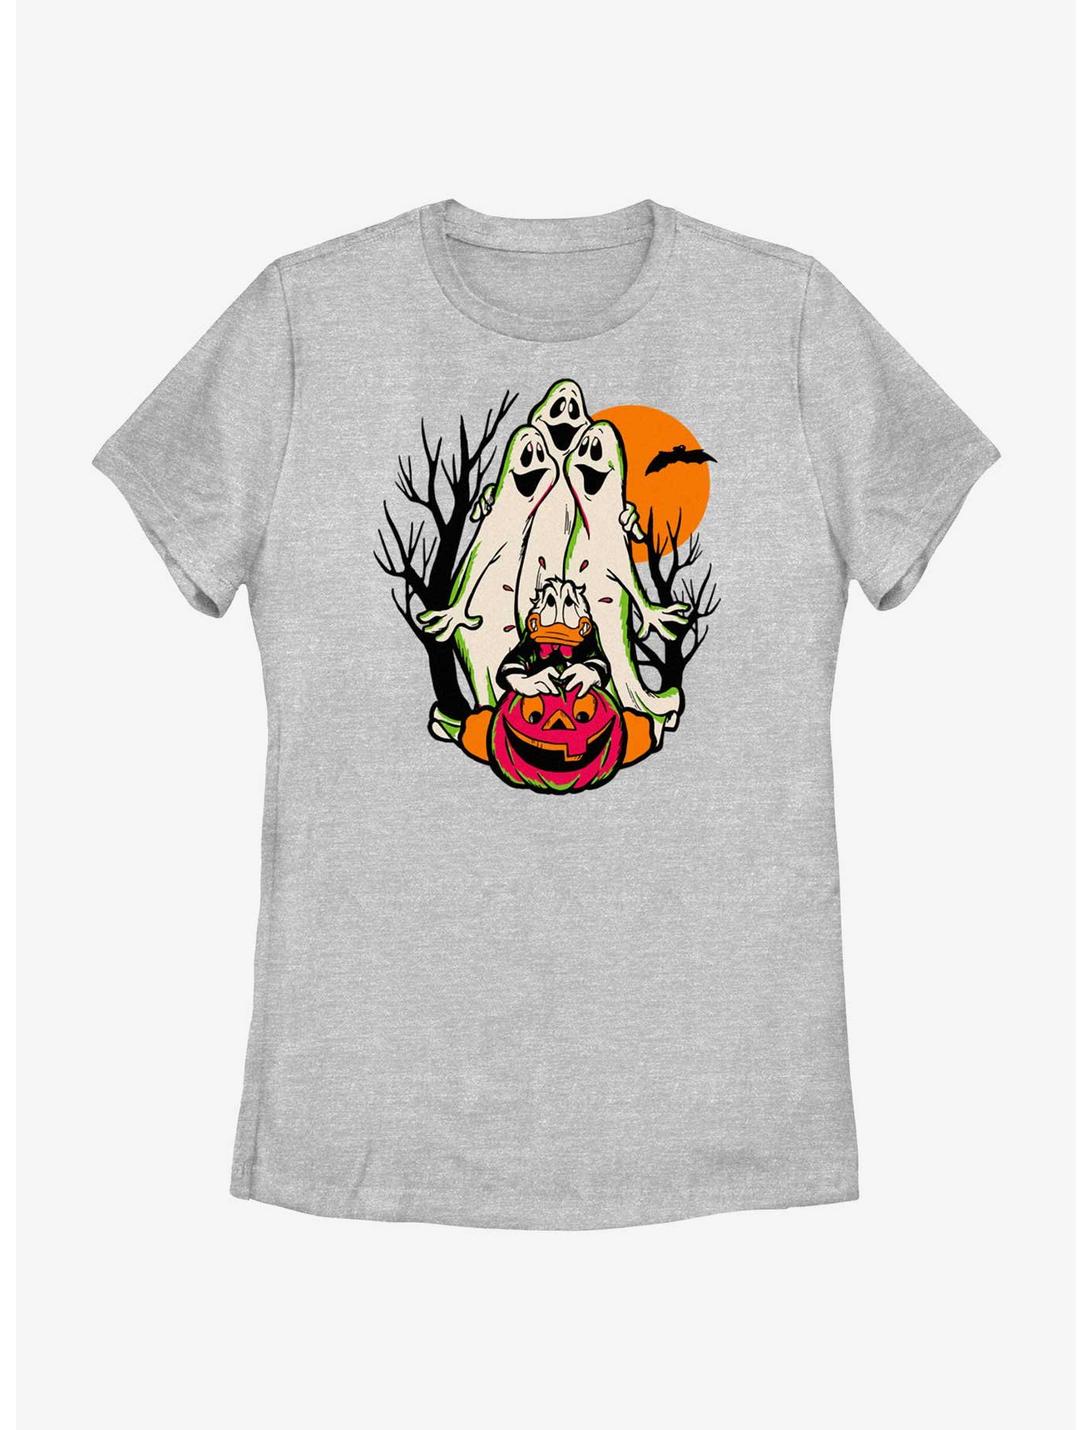 Disney100 Halloween Spooky Ghosts Scared Donald Women's T-Shirt, ATH HTR, hi-res